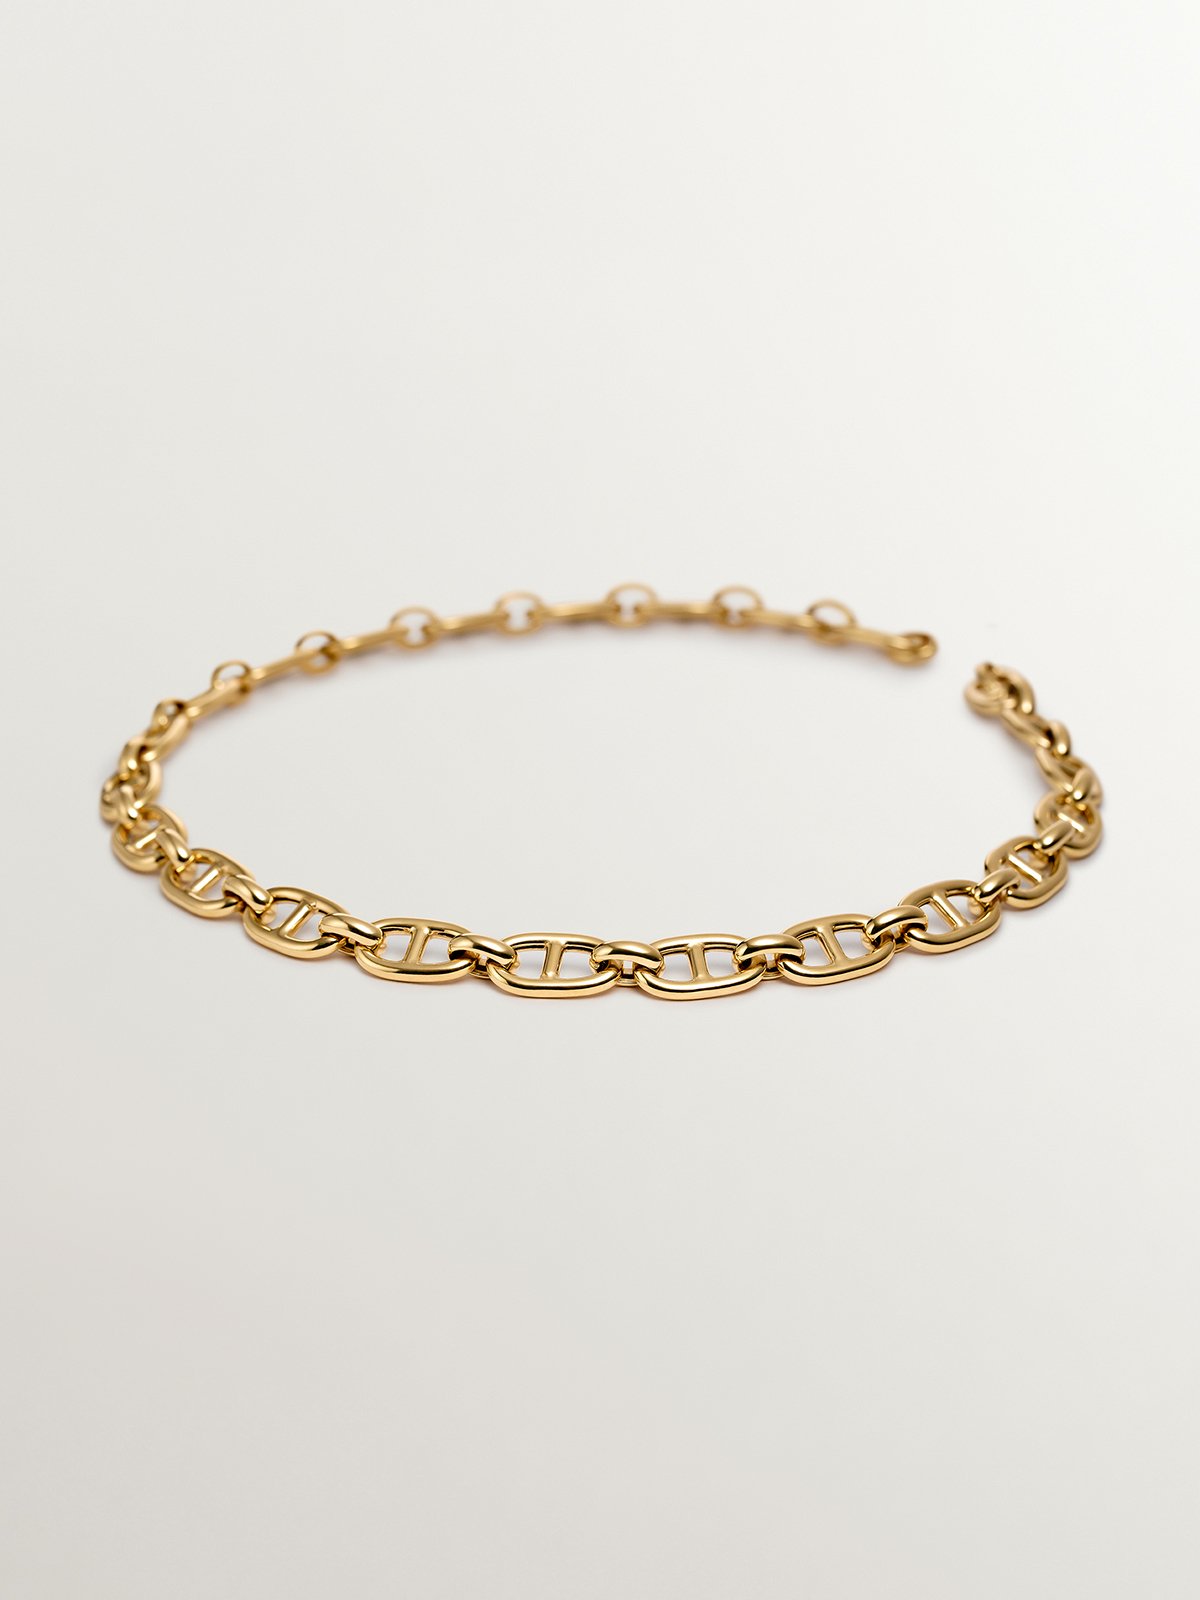 925 Silver Curb Link Chain coated in 18K Yellow Gold